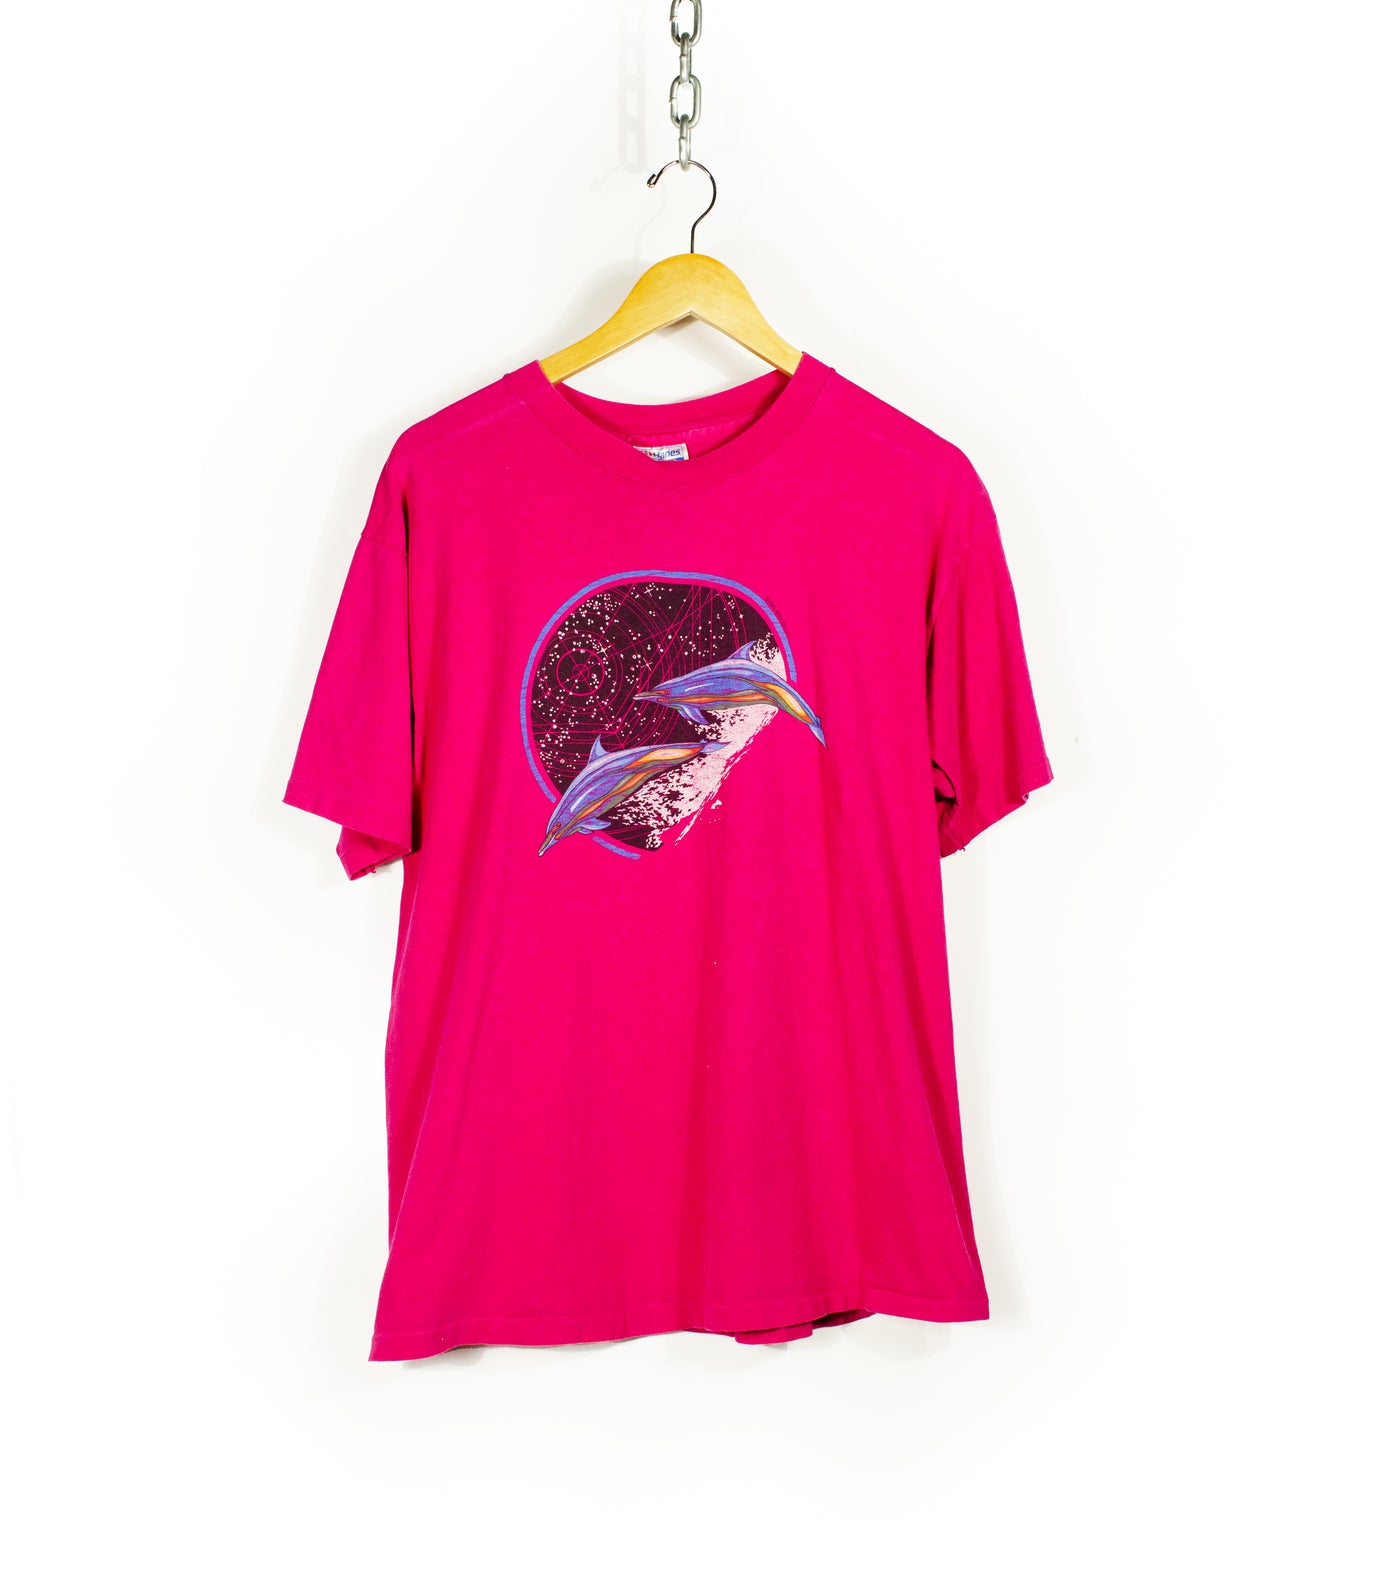 Vintage 1986 Dolphin Space T-Shirt